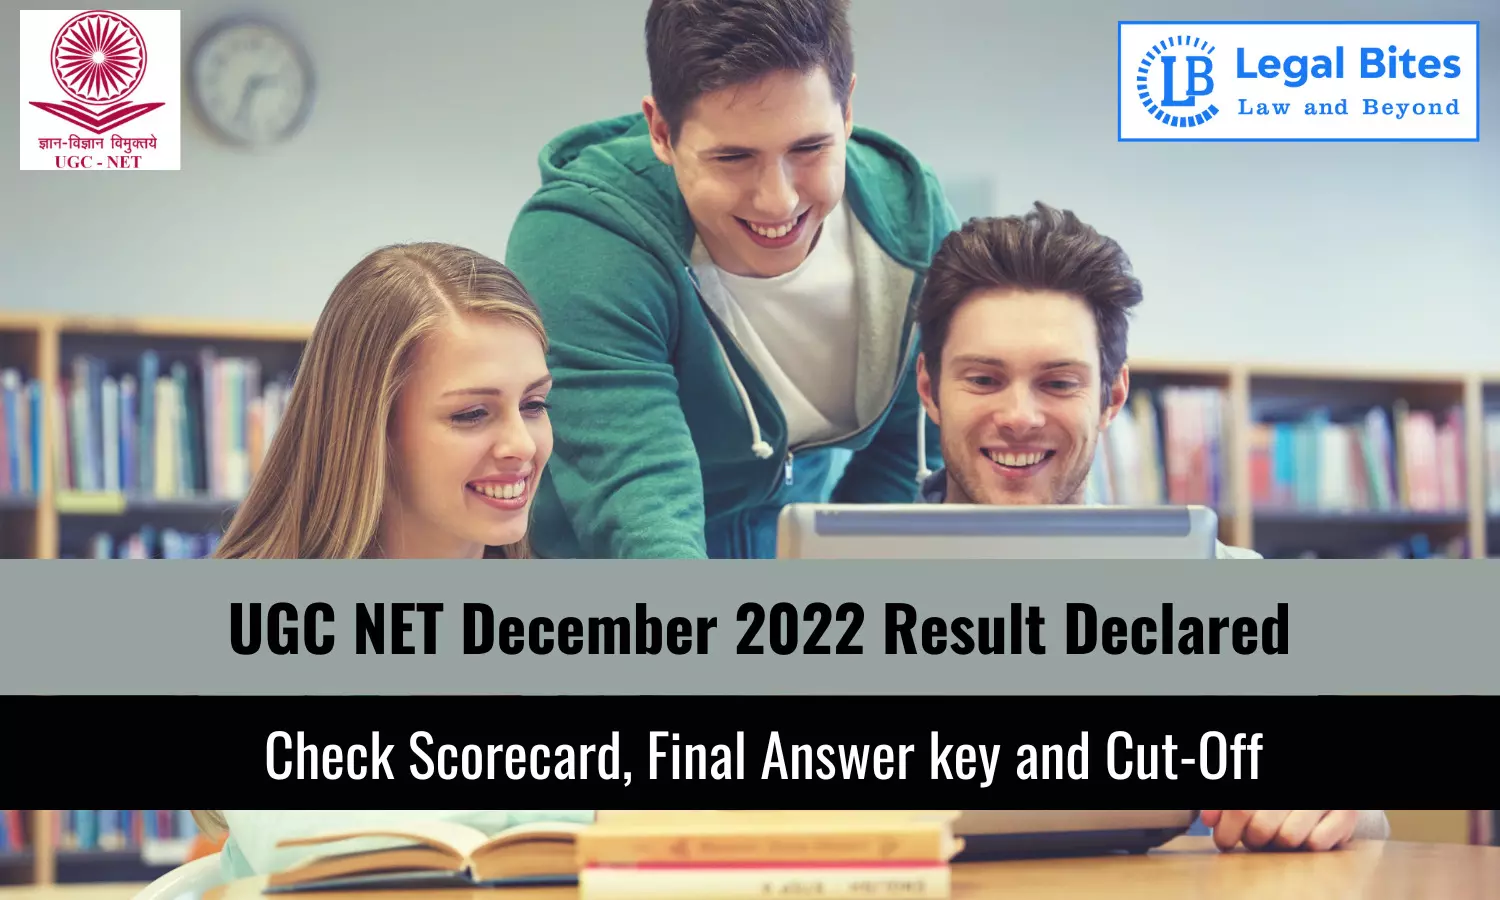 UGC NET December 2022 Result Declared: Check Scorecard, Final Answer Key and Cut-Off Here